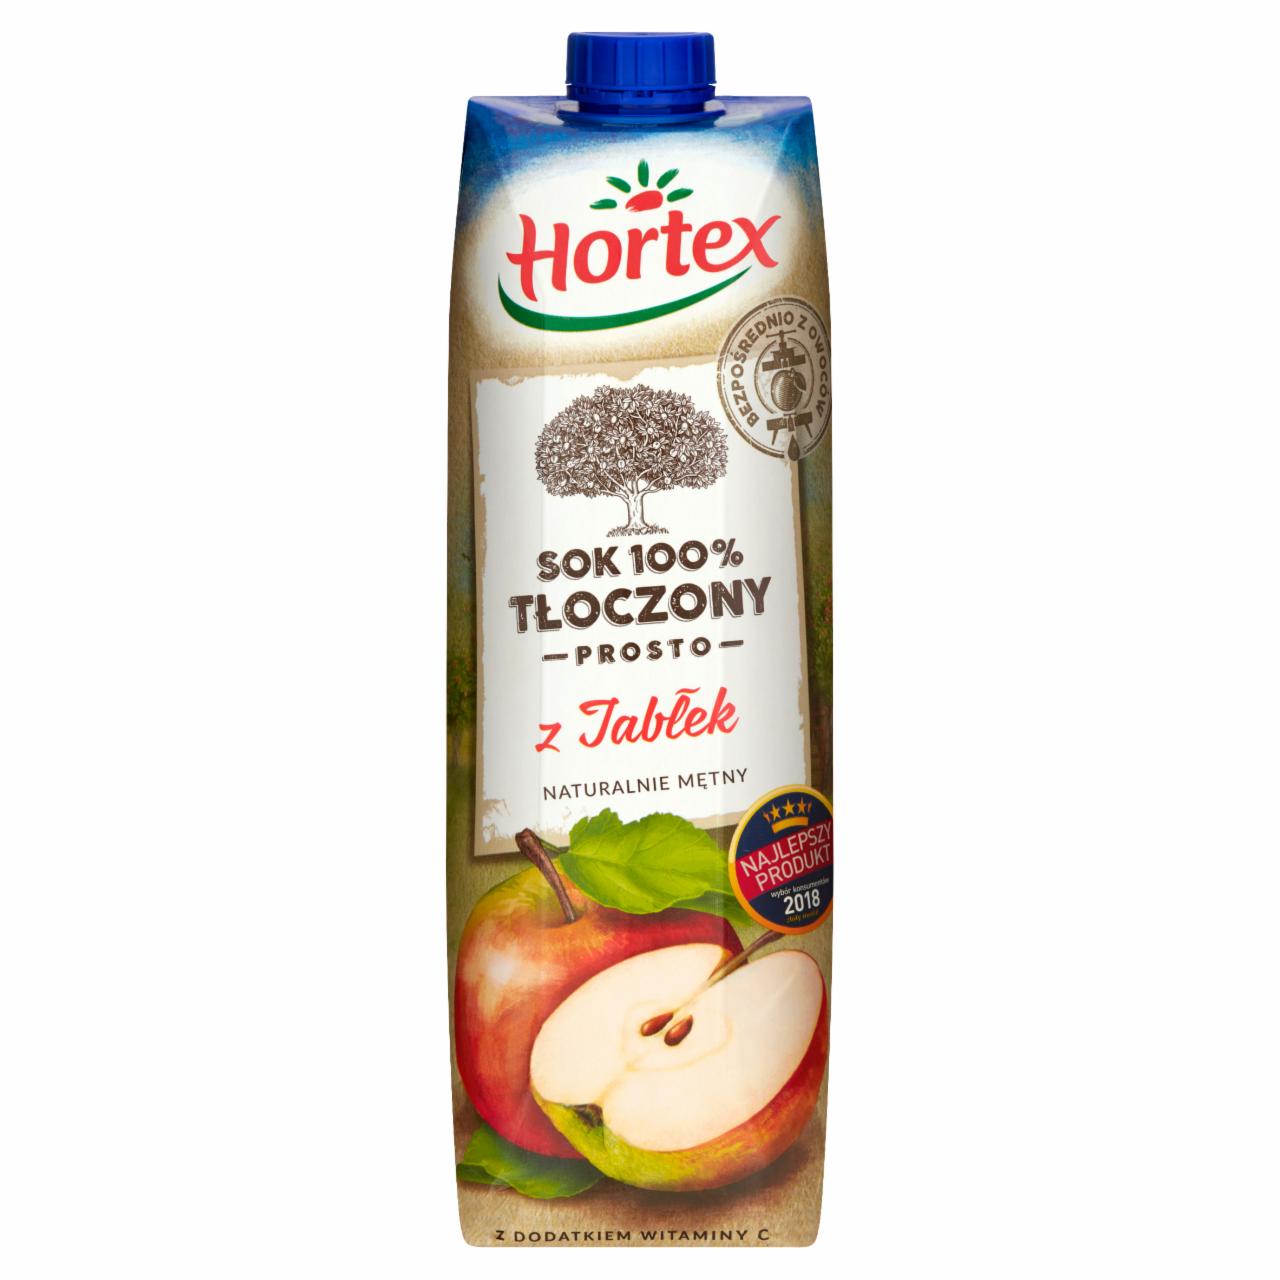 Photo - Hortex 100% Pressed Juice from Apples 1 L